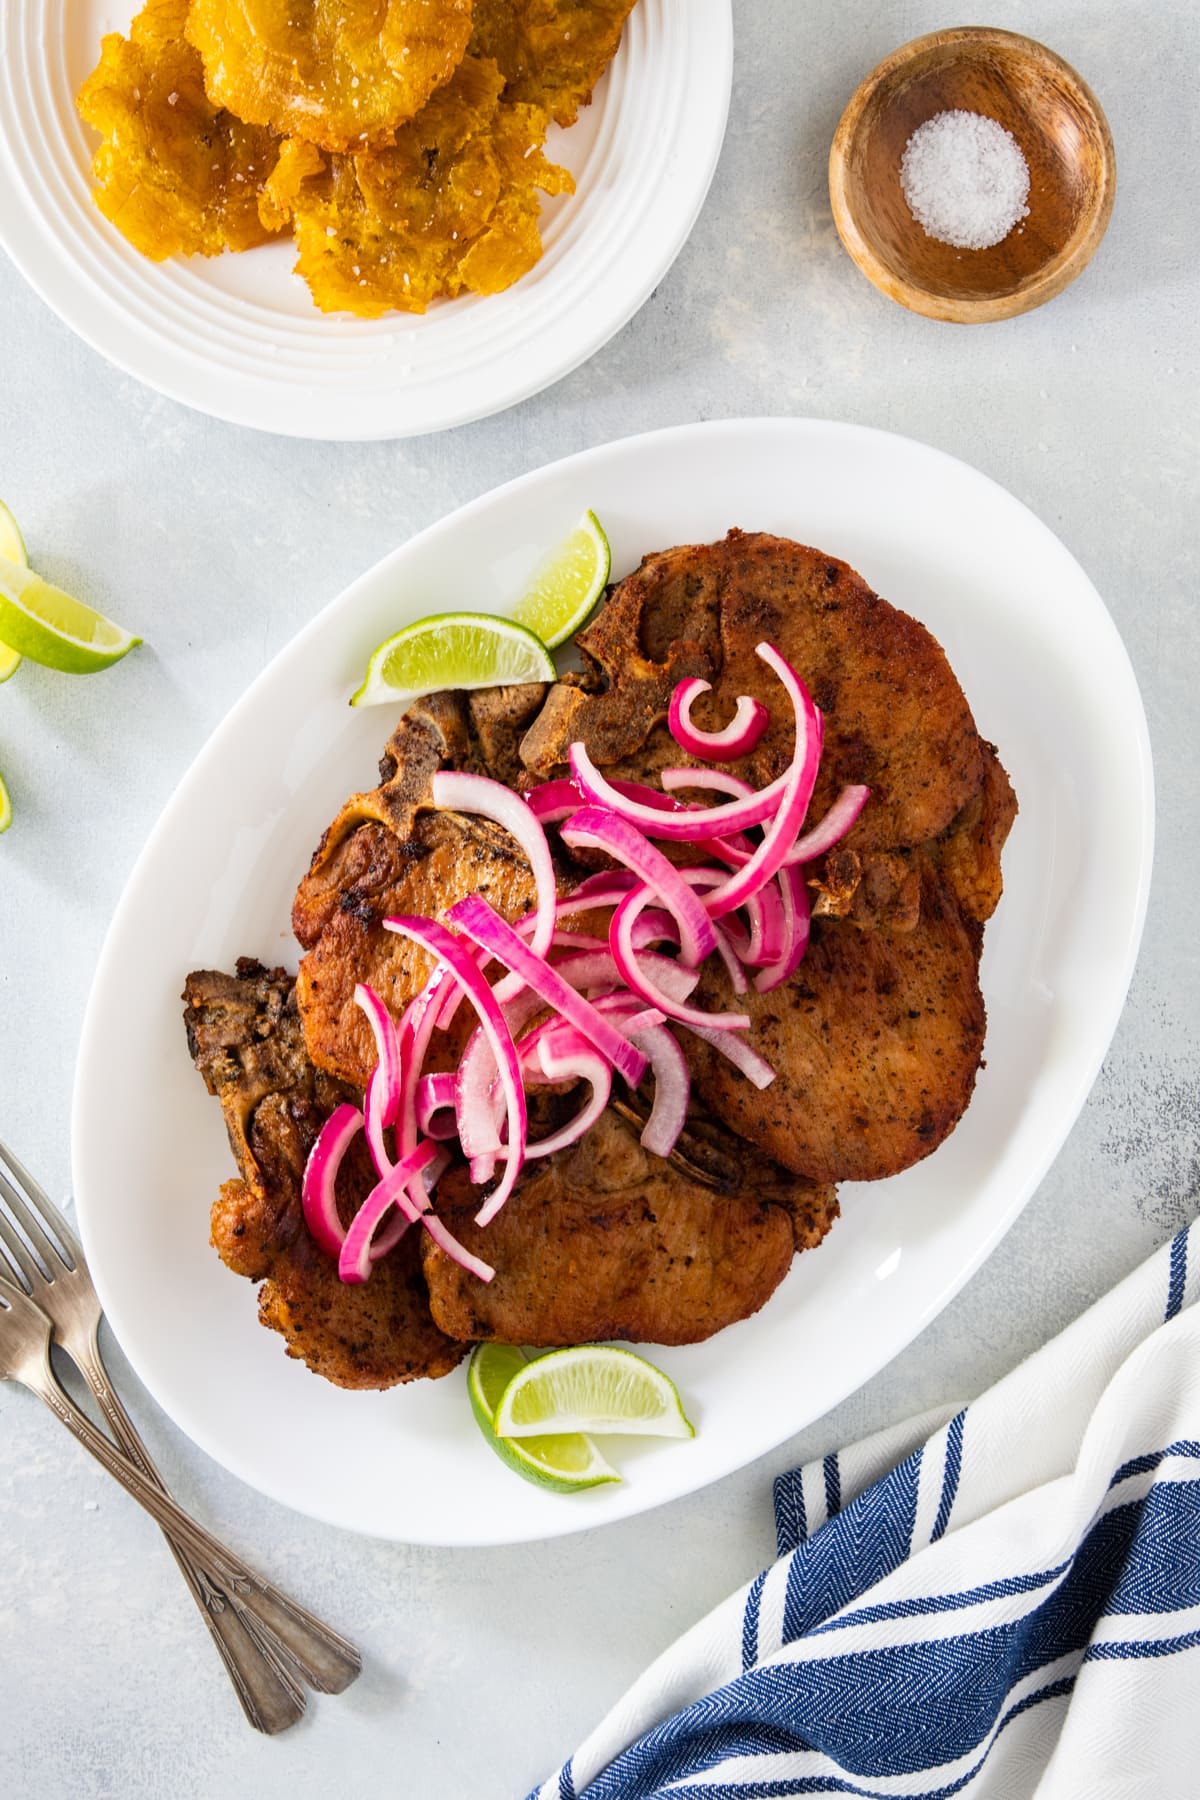 Dominican Fried Pork Chops (Chuletas Fritas) - My Dominican Kitchen